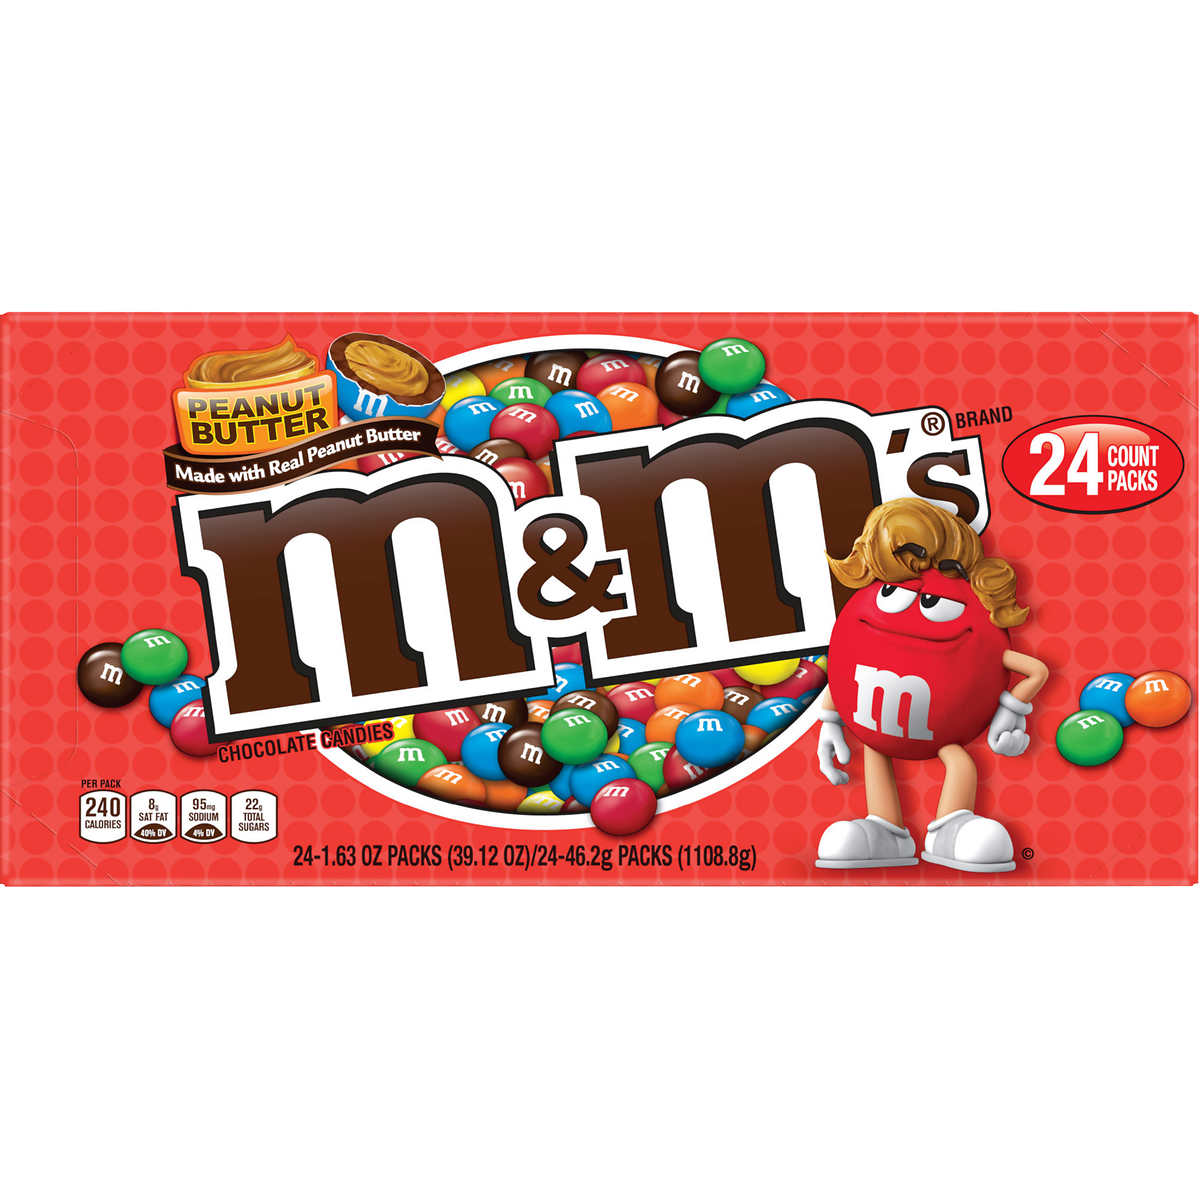 Consumer finds plastic object in peanut M&Ms in Norway